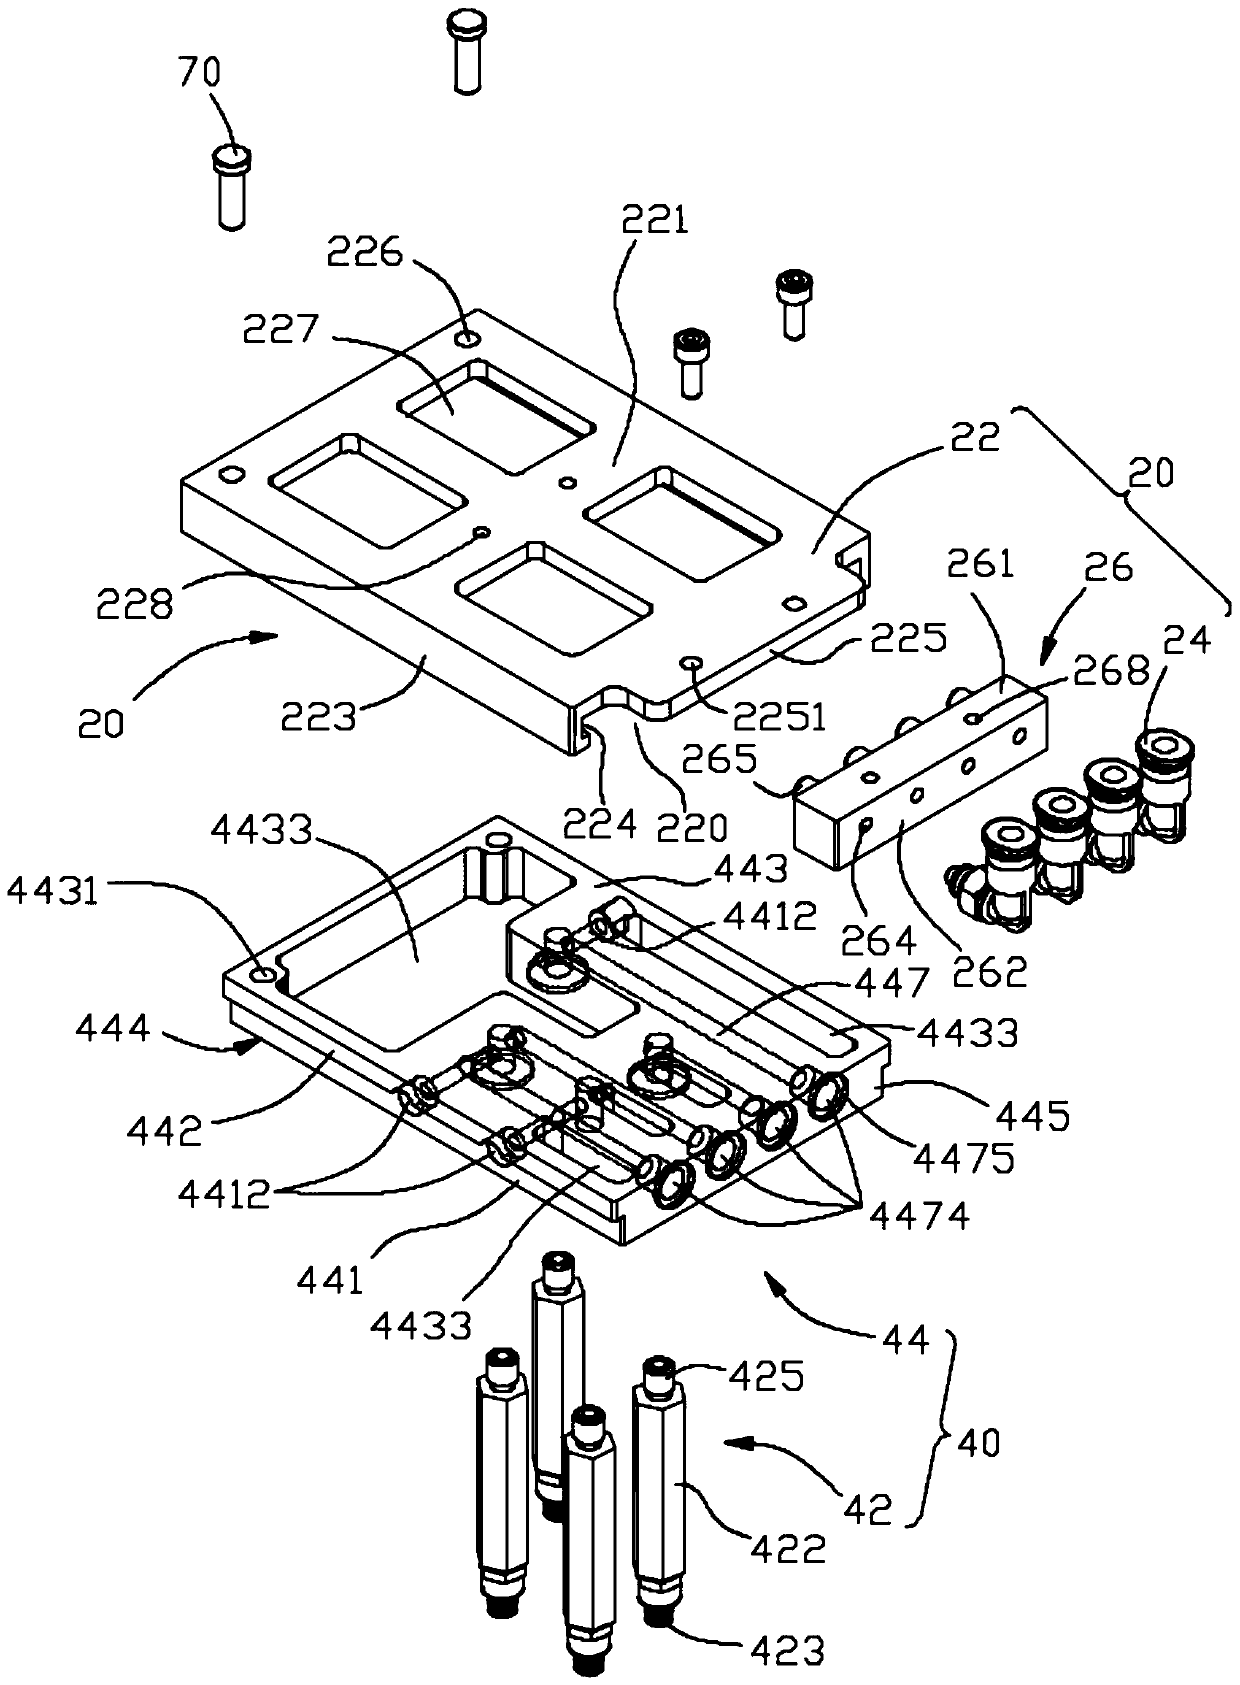 Material sucking mechanism and material conveying device